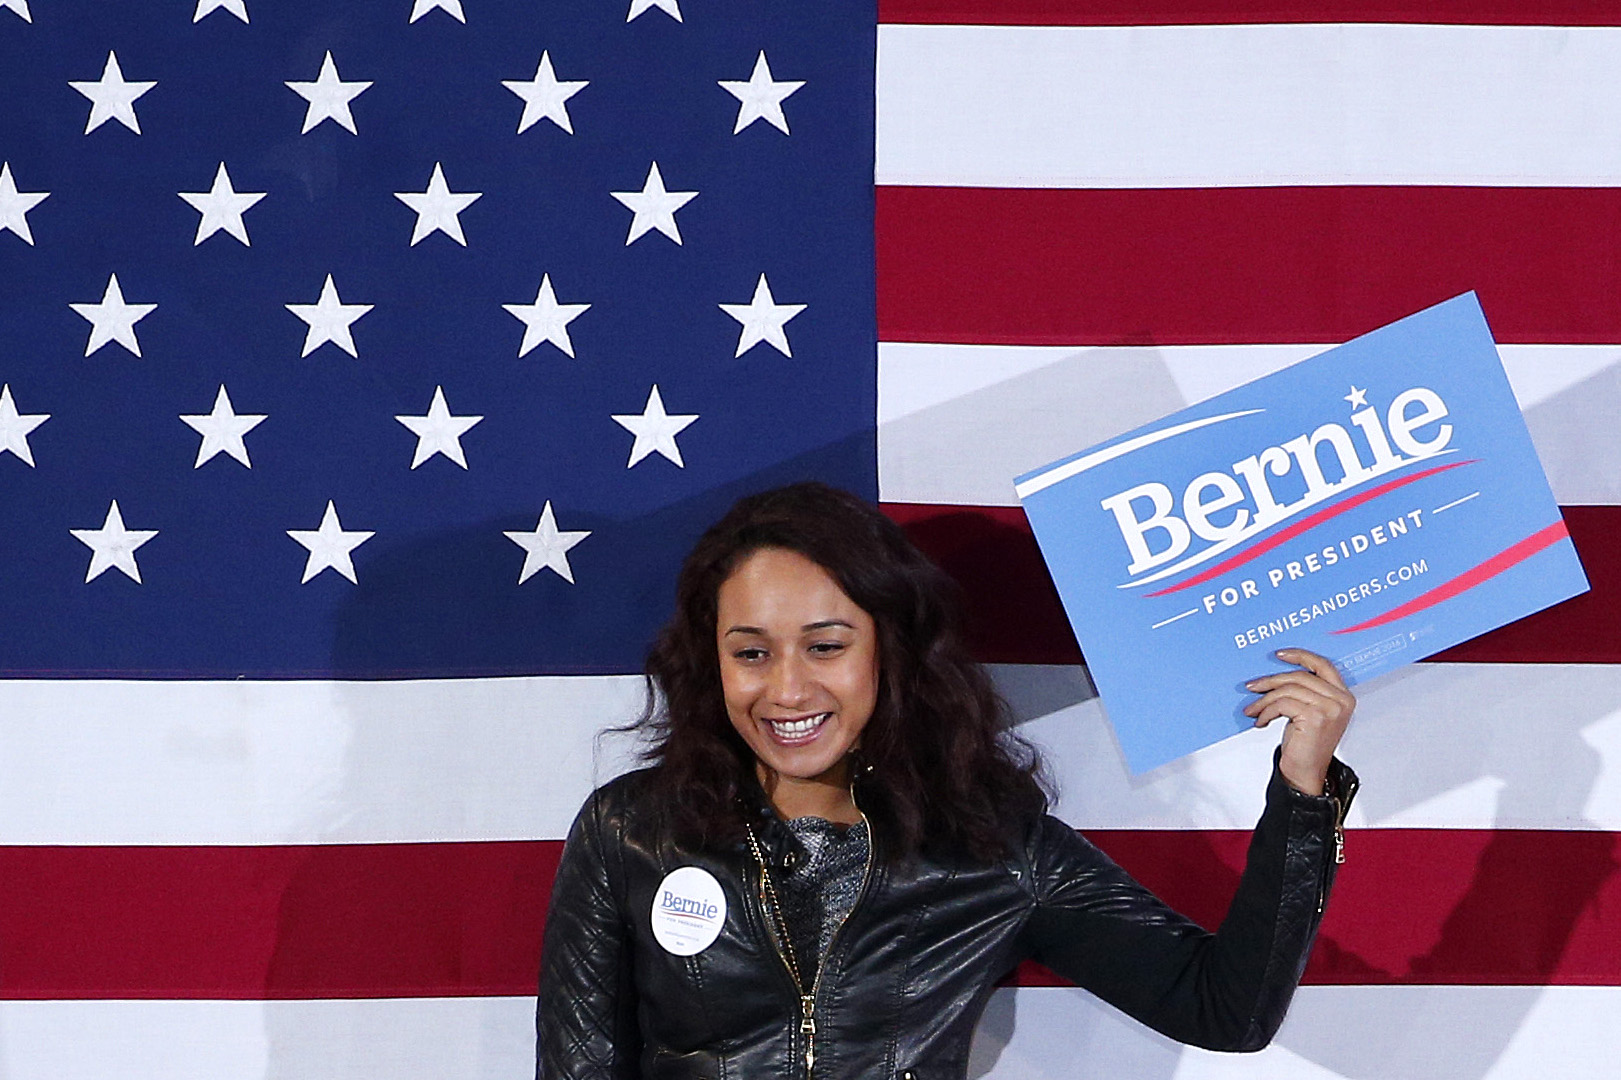 A woman holds up a sign at a rally for democratic presidential candidate Sen. Bernie Sanders, I-Vt., on Nov. 8, 2015, in Las Vegas.